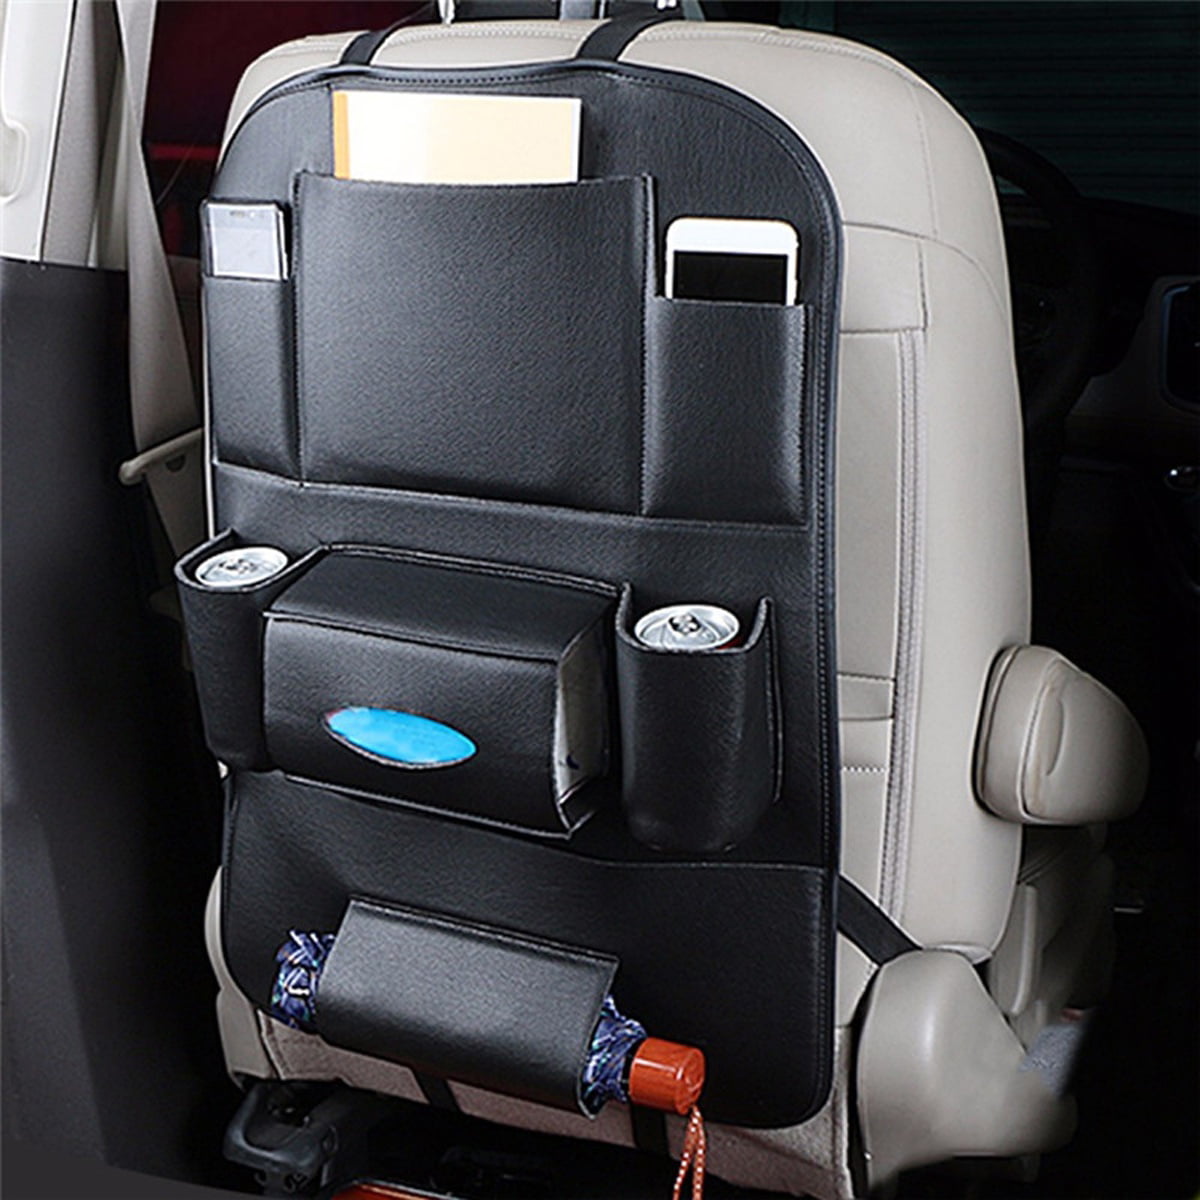 Car Backseat Organizer Pu Leather Multi Pockets Back Seat Protector With Tissue Box Cell Phone